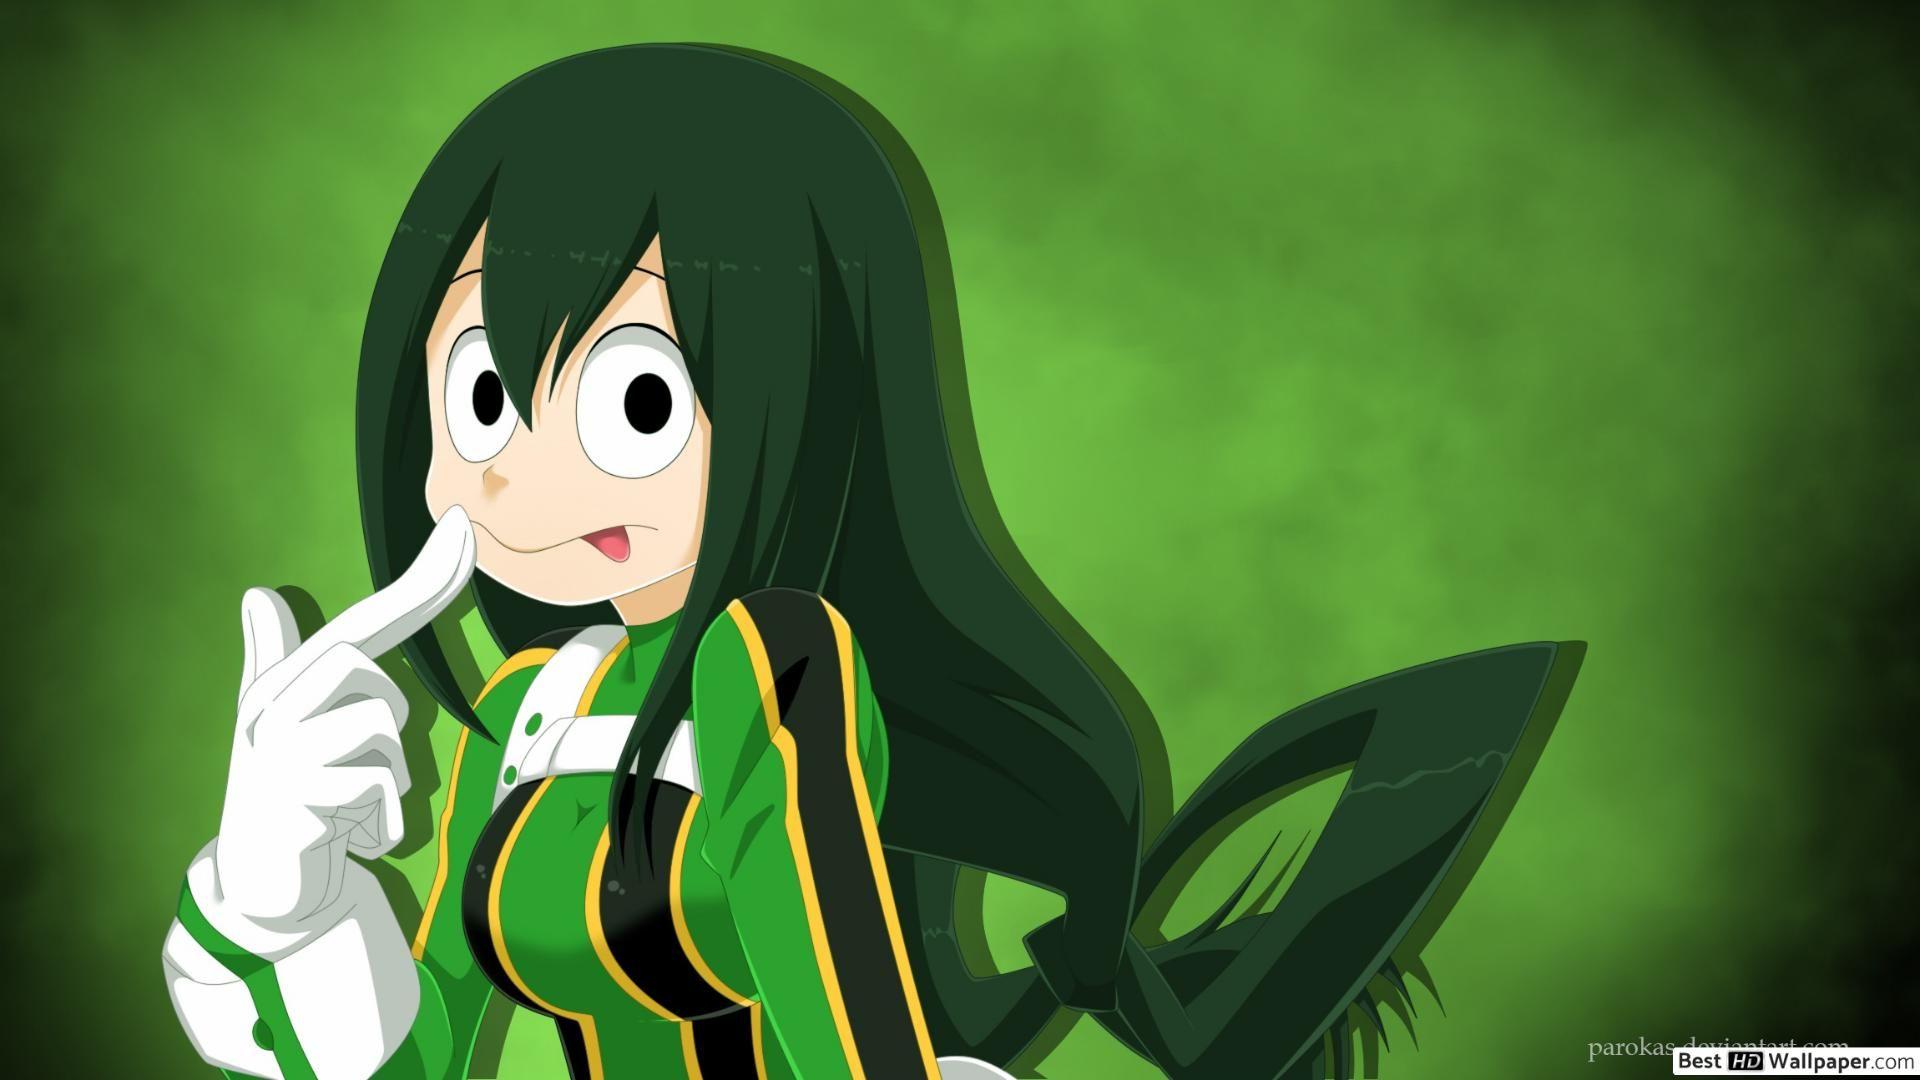 Mobile wallpaper Anime My Hero Academia Tsuyu Asui 438123 download the  picture for free